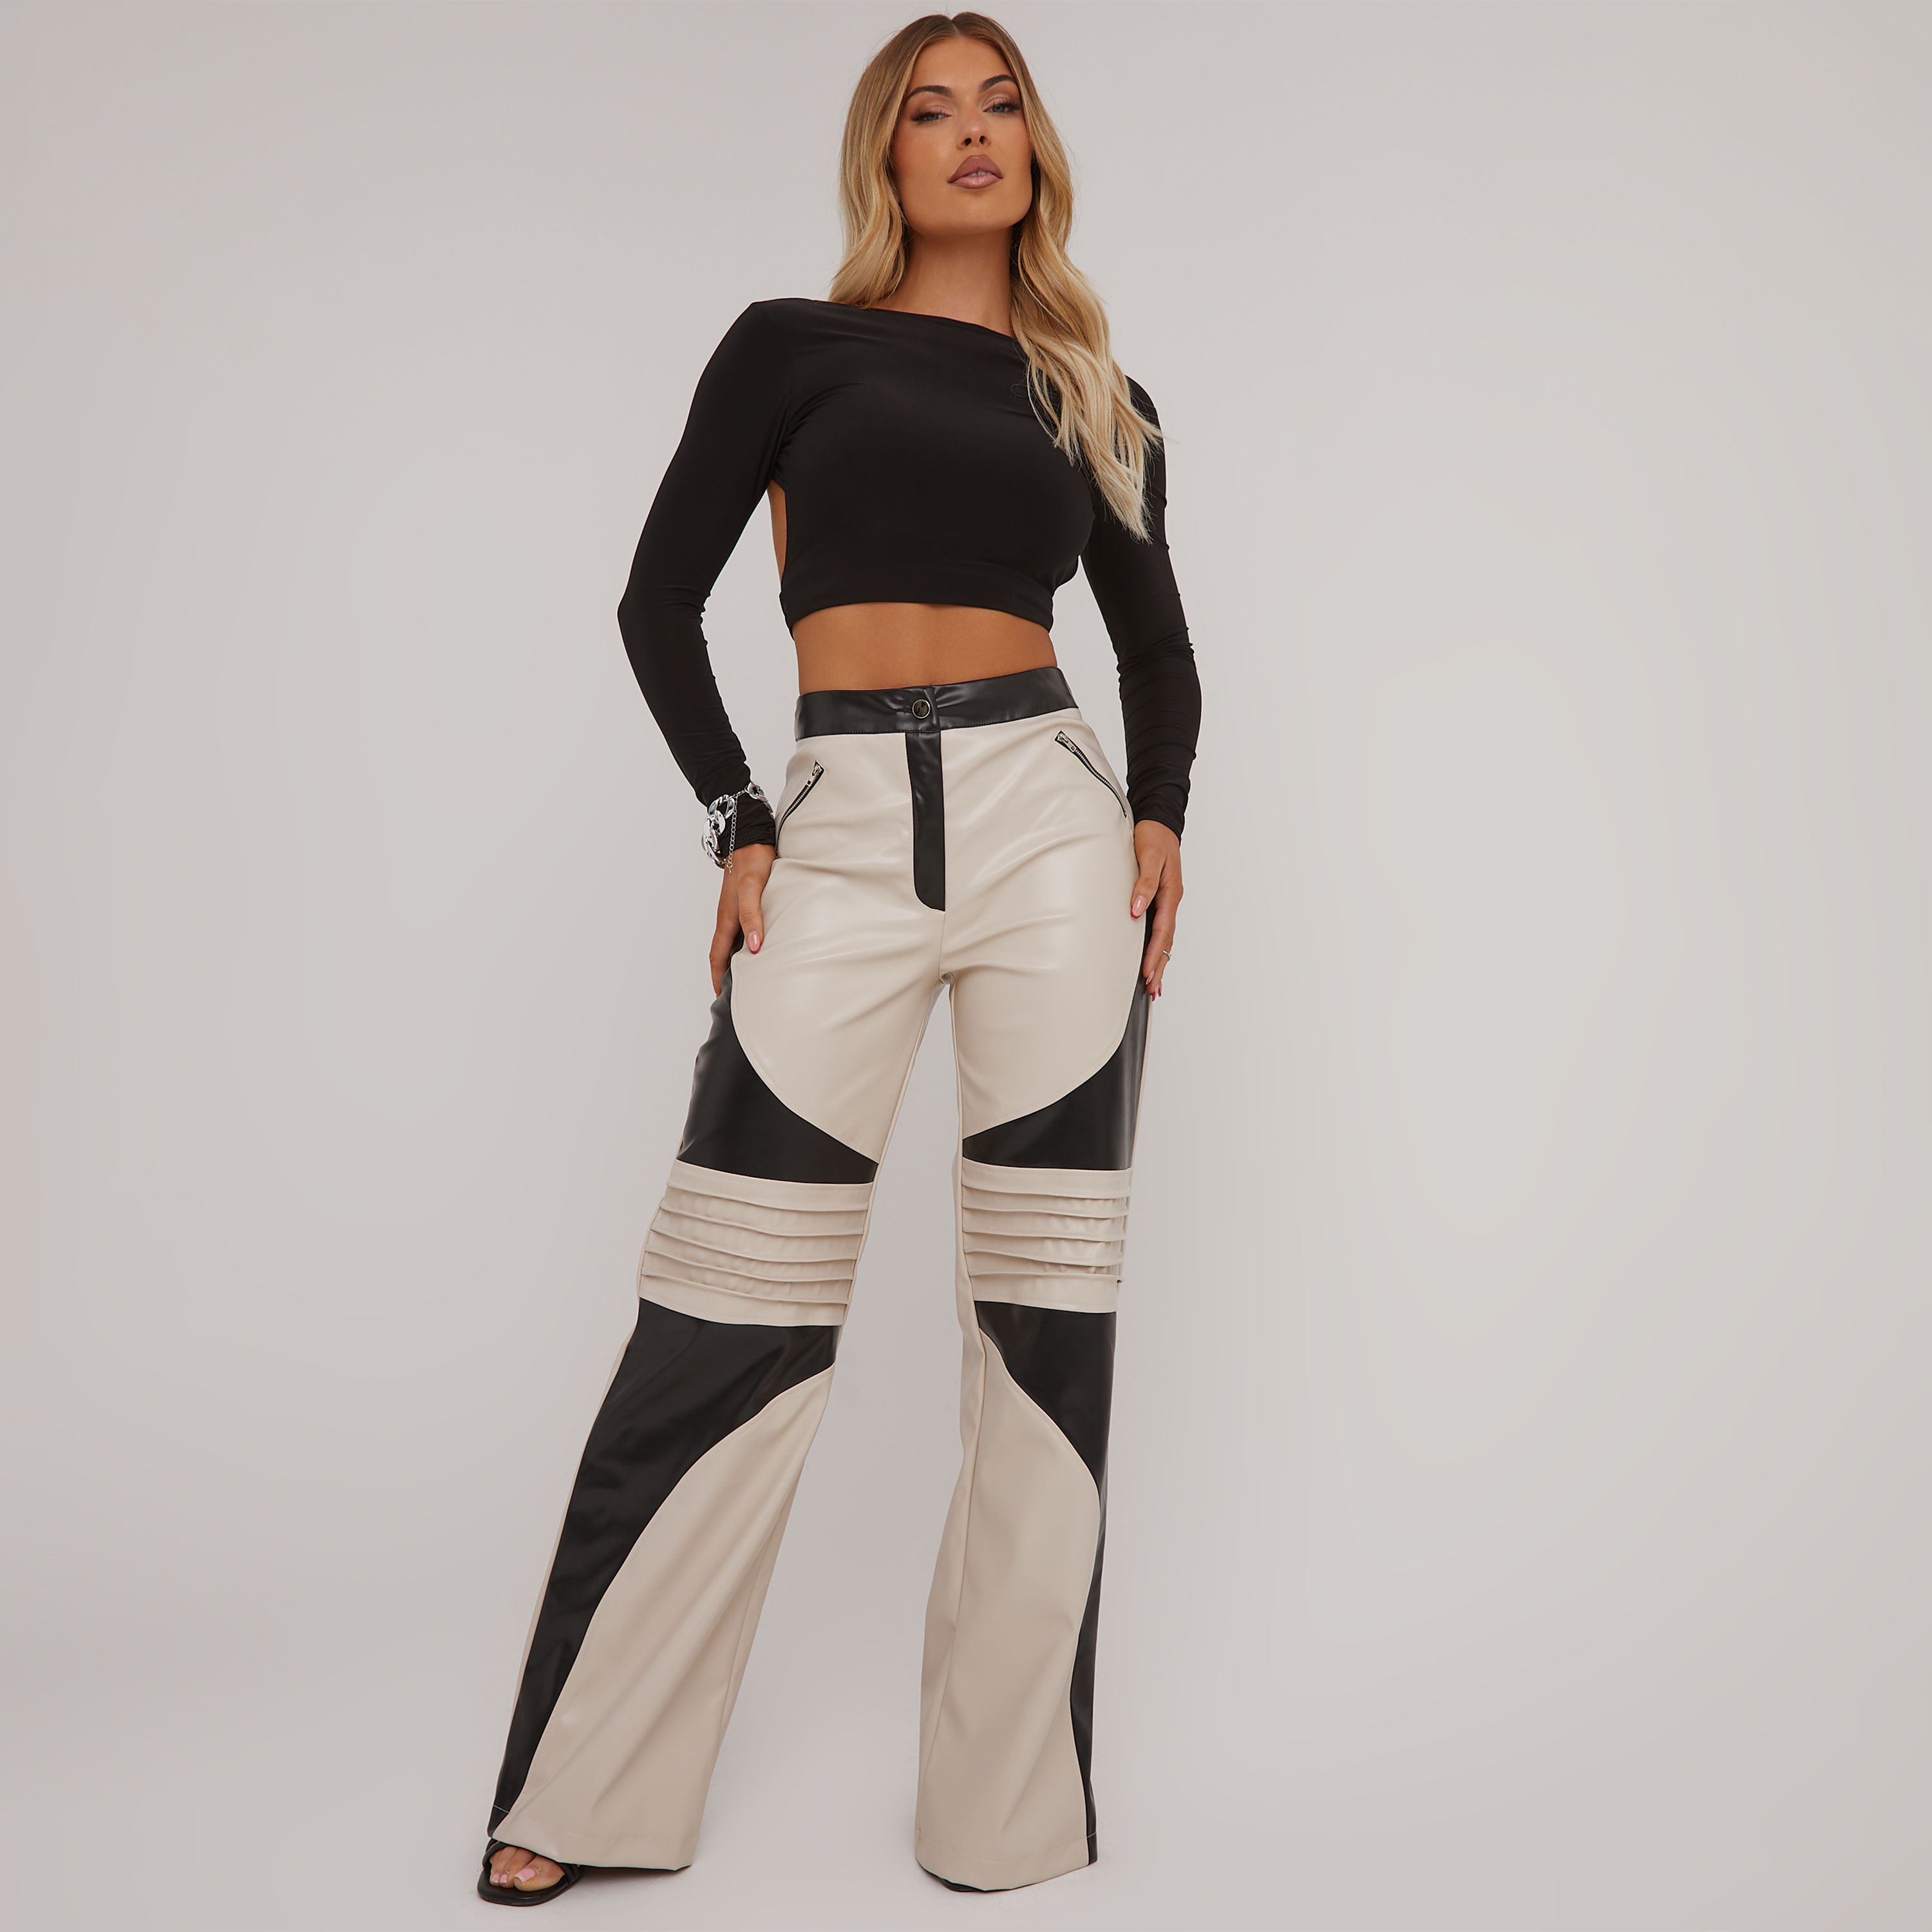 Motorcross Colorblock Real Leather Flared Pants